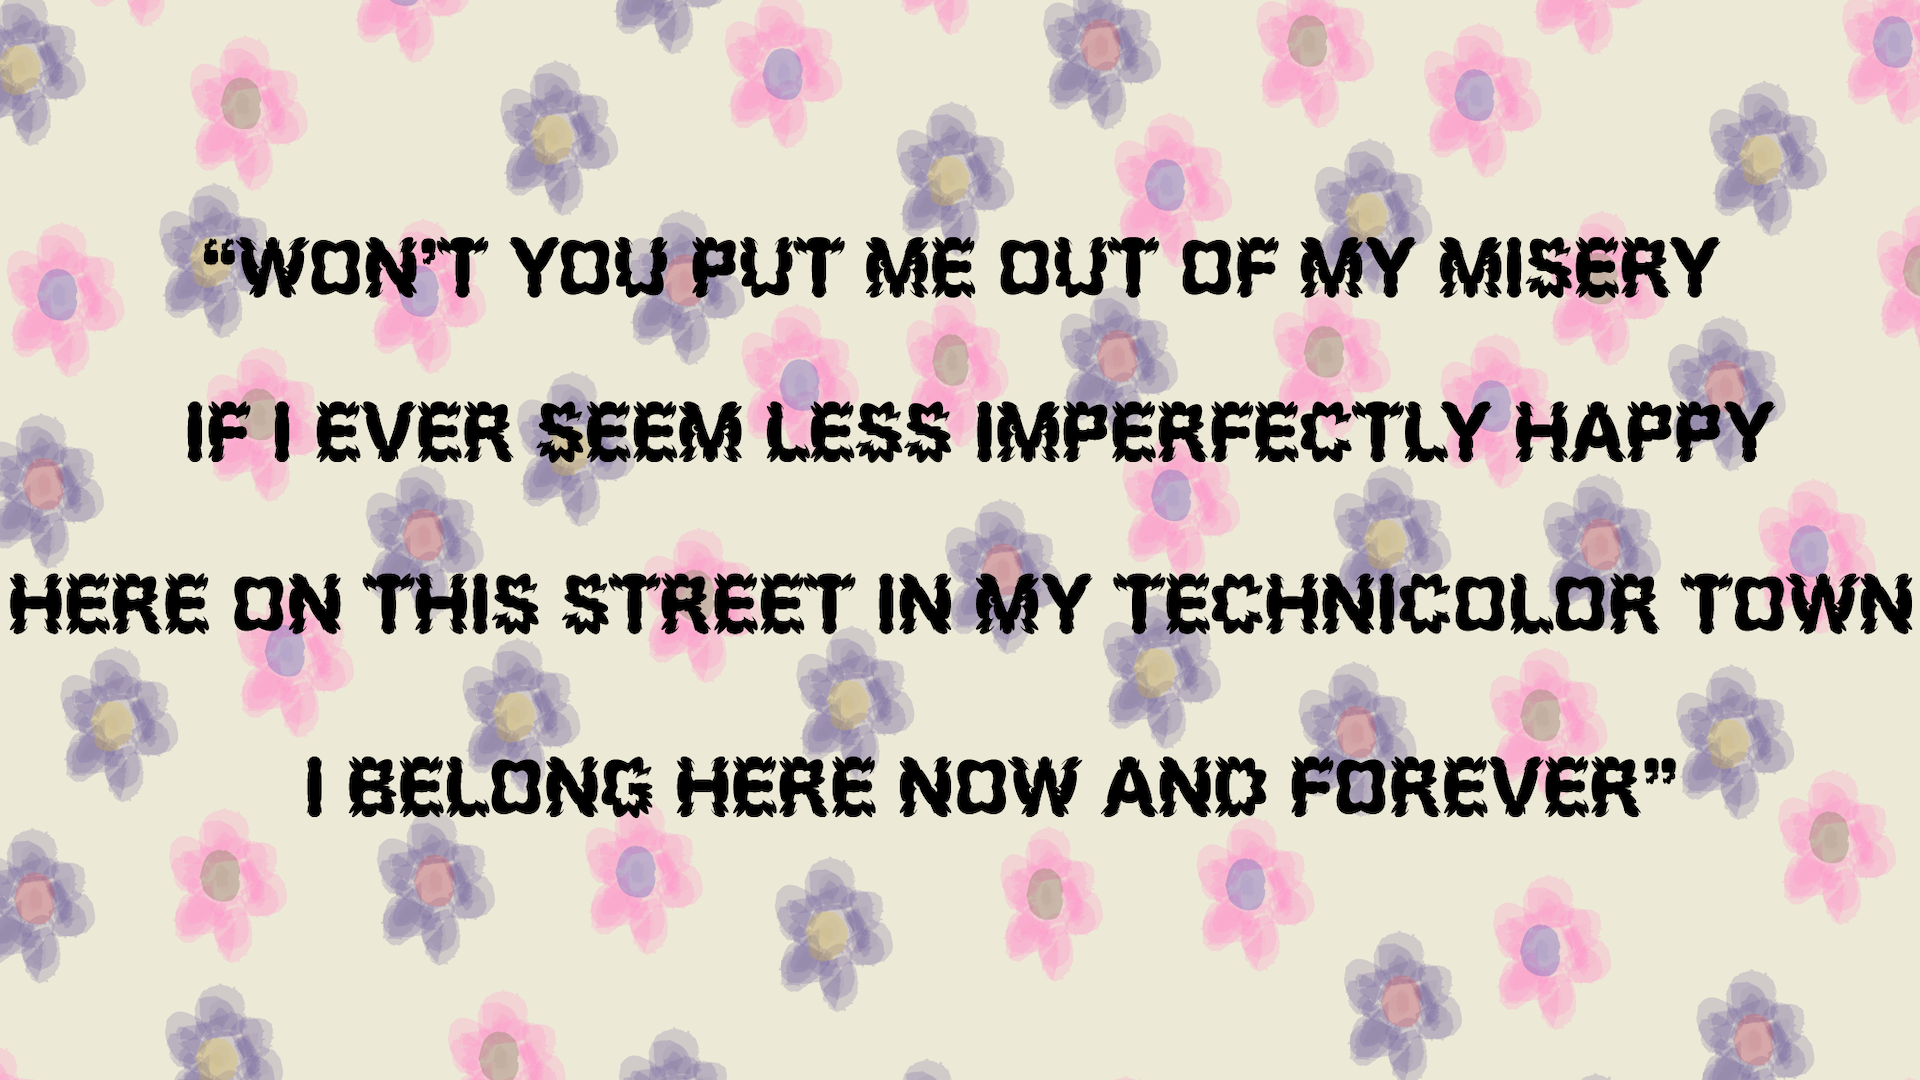 Image of a quote from Tele Novella’s album Merlynn Belle, “won’t you put me out of my misery/if I ever seem less imperfectly happy/here on this street in my technicolor town/I belong here now and forever” with a multi colored flower background.